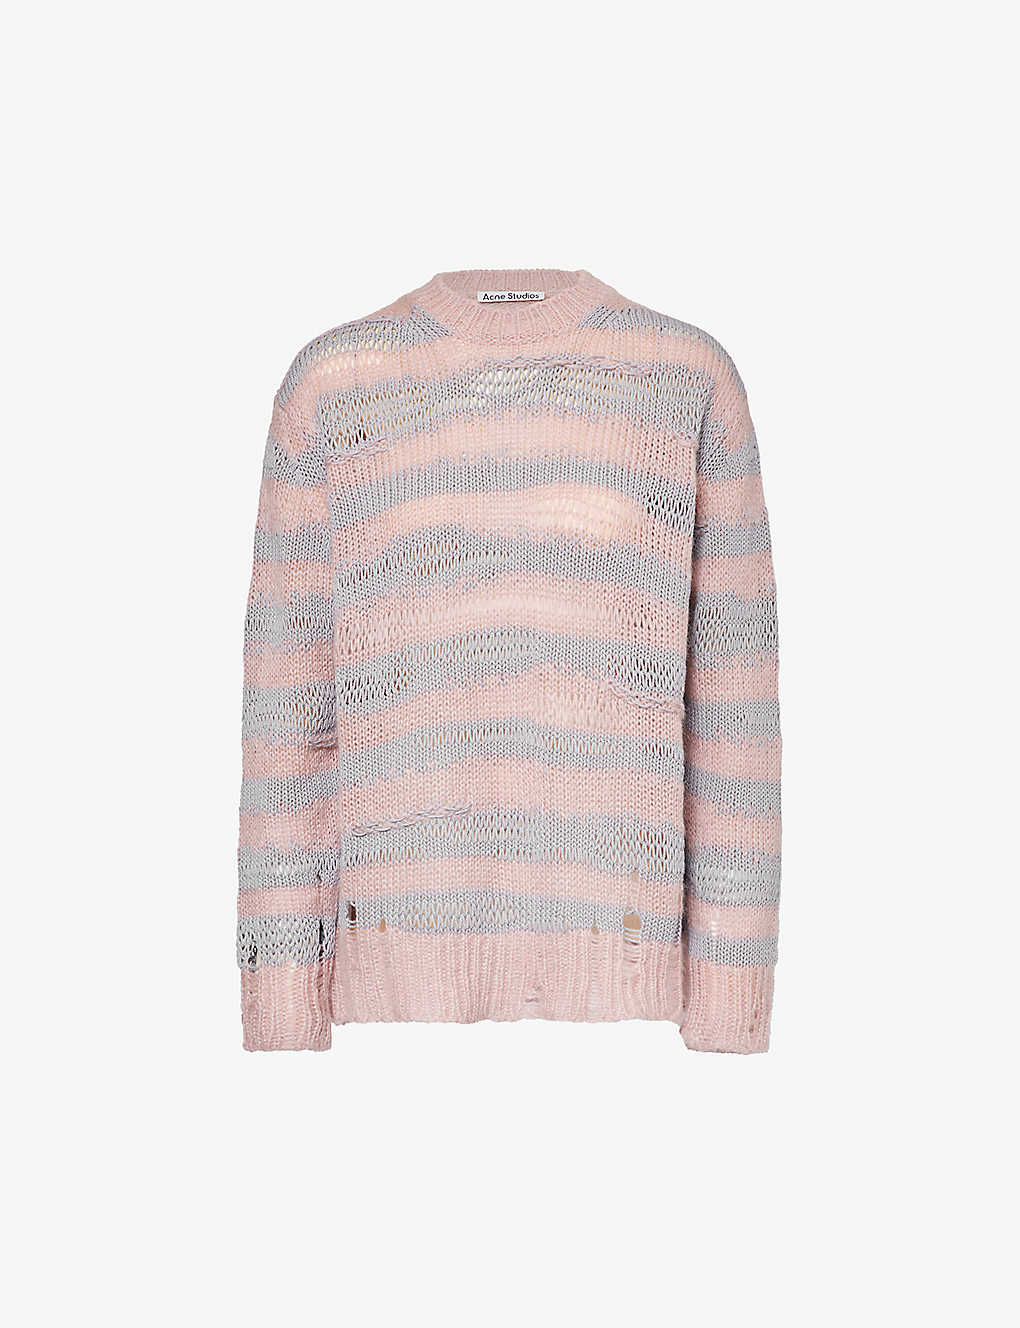 Acne Studios Womens Dusty Pink Lilac Karita Distressed Knitted Jumper